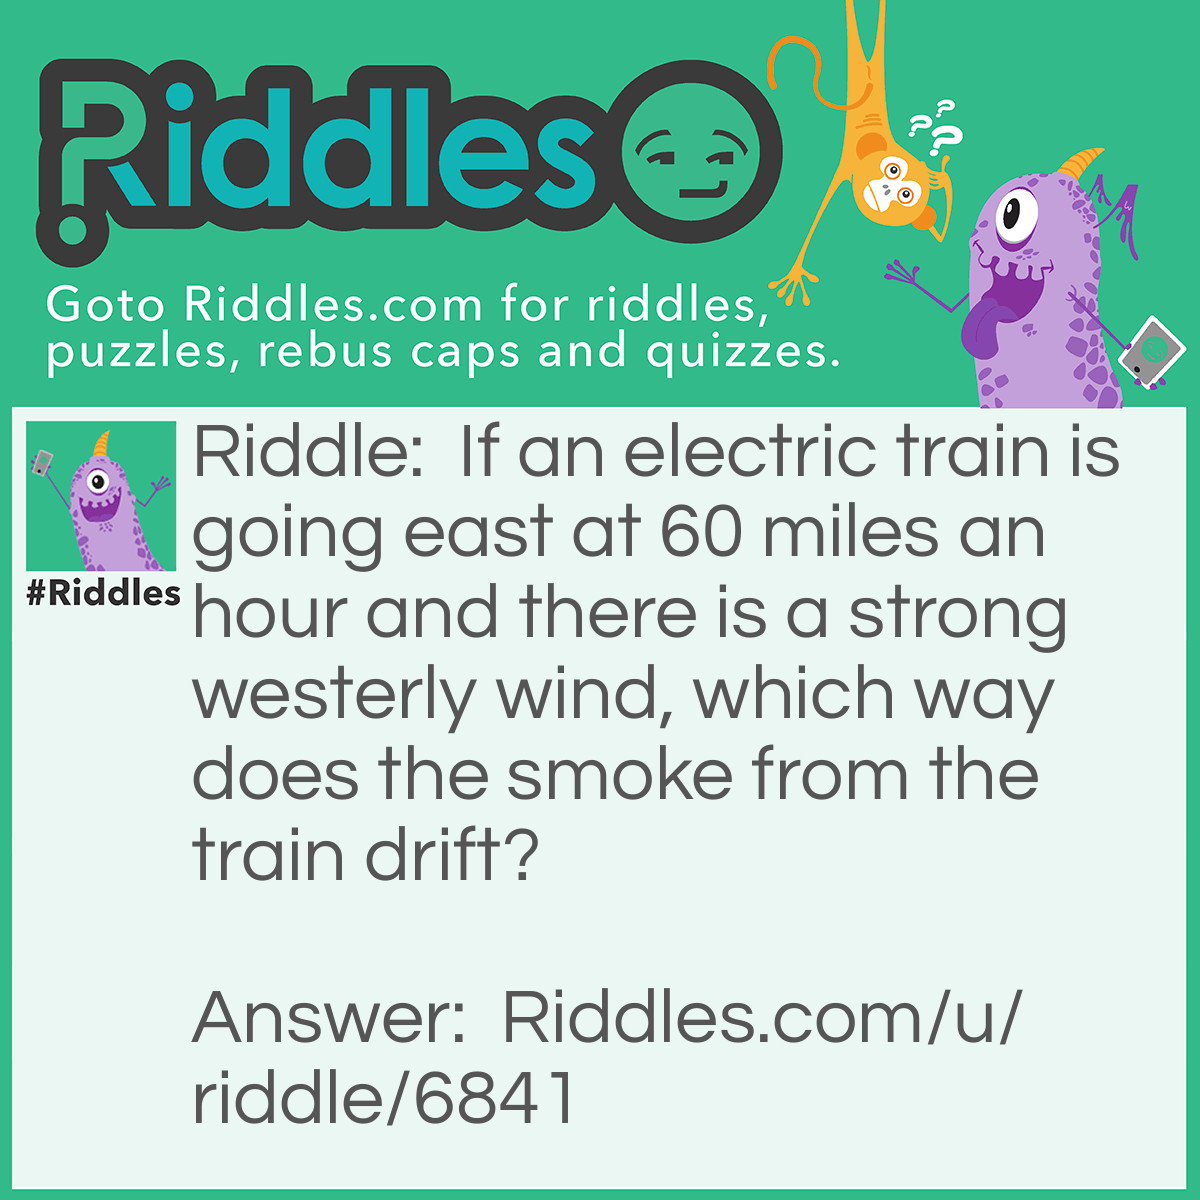 Riddle: If an electric train is going east at 60 miles an hour and there is a strong westerly wind, which way does the smoke from the train drift? Answer: There is no smoke coming from electric trains.